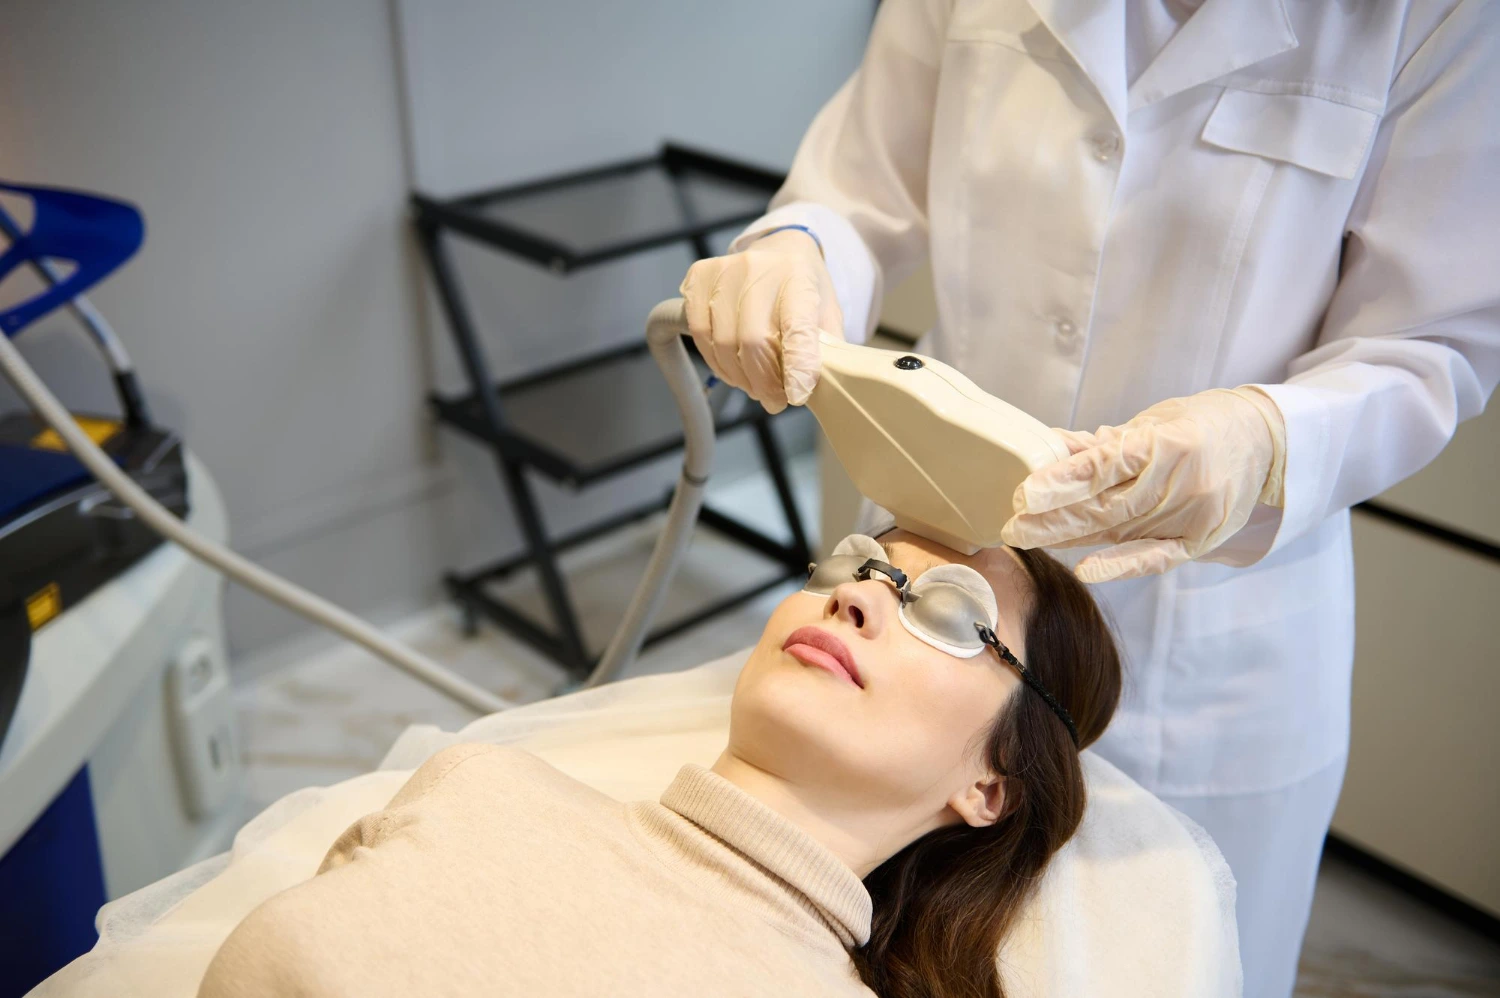 A lady undergoing Pigment Laser Treatment at clinic.